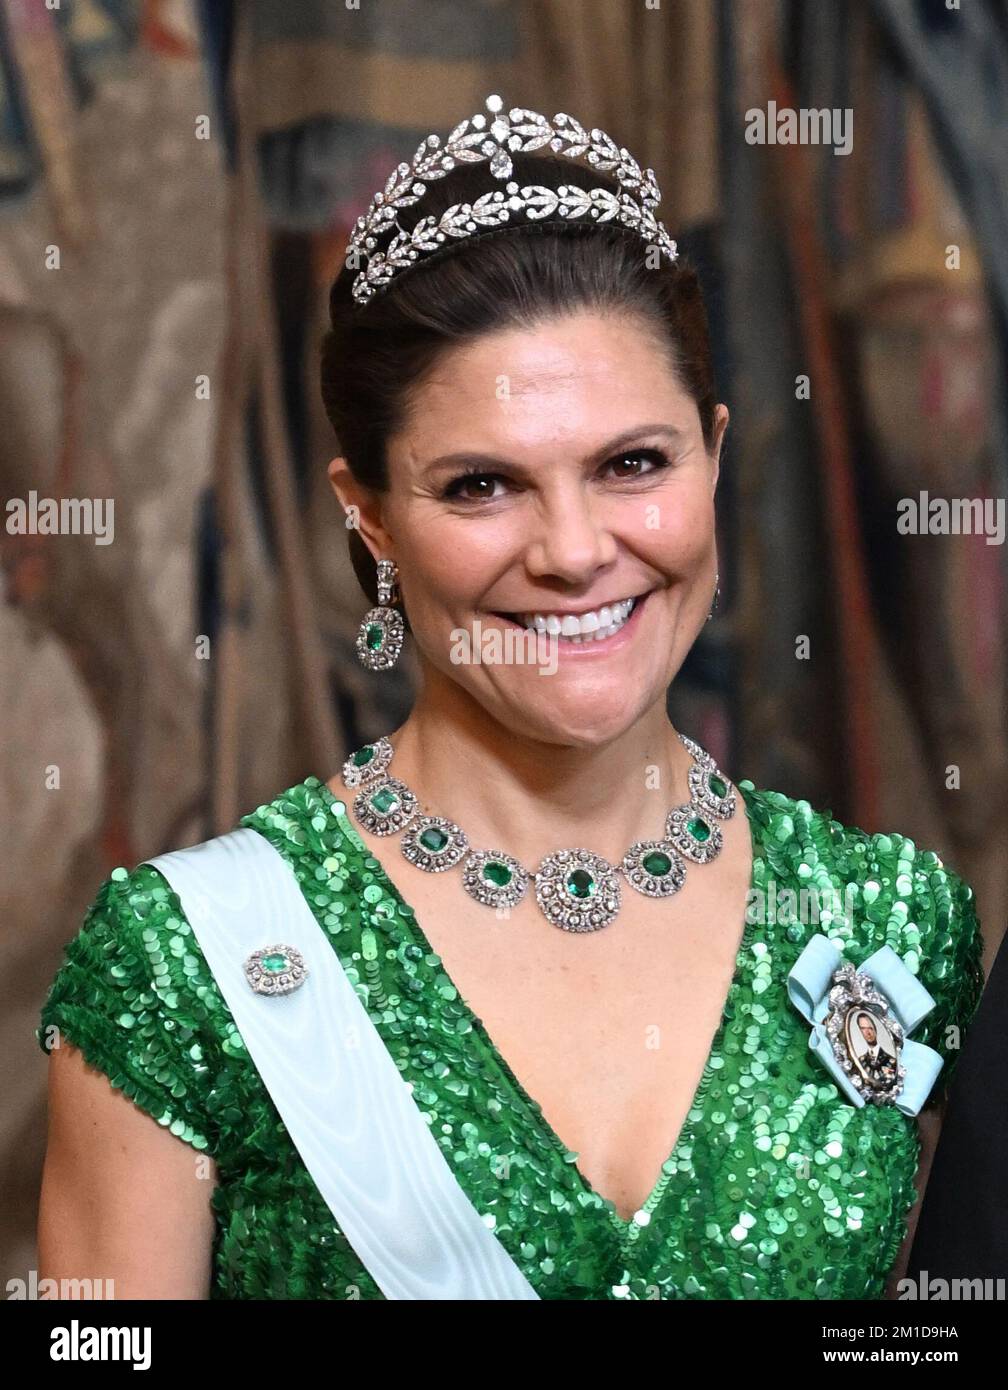 Crown Princess Victoria attends the King's dinner for the Nobel laureates at the Royal Palace in Stockholm, Sweden, 11 December 2022. Photo: Pontus Lundahl / TT / 10050 Stock Photo